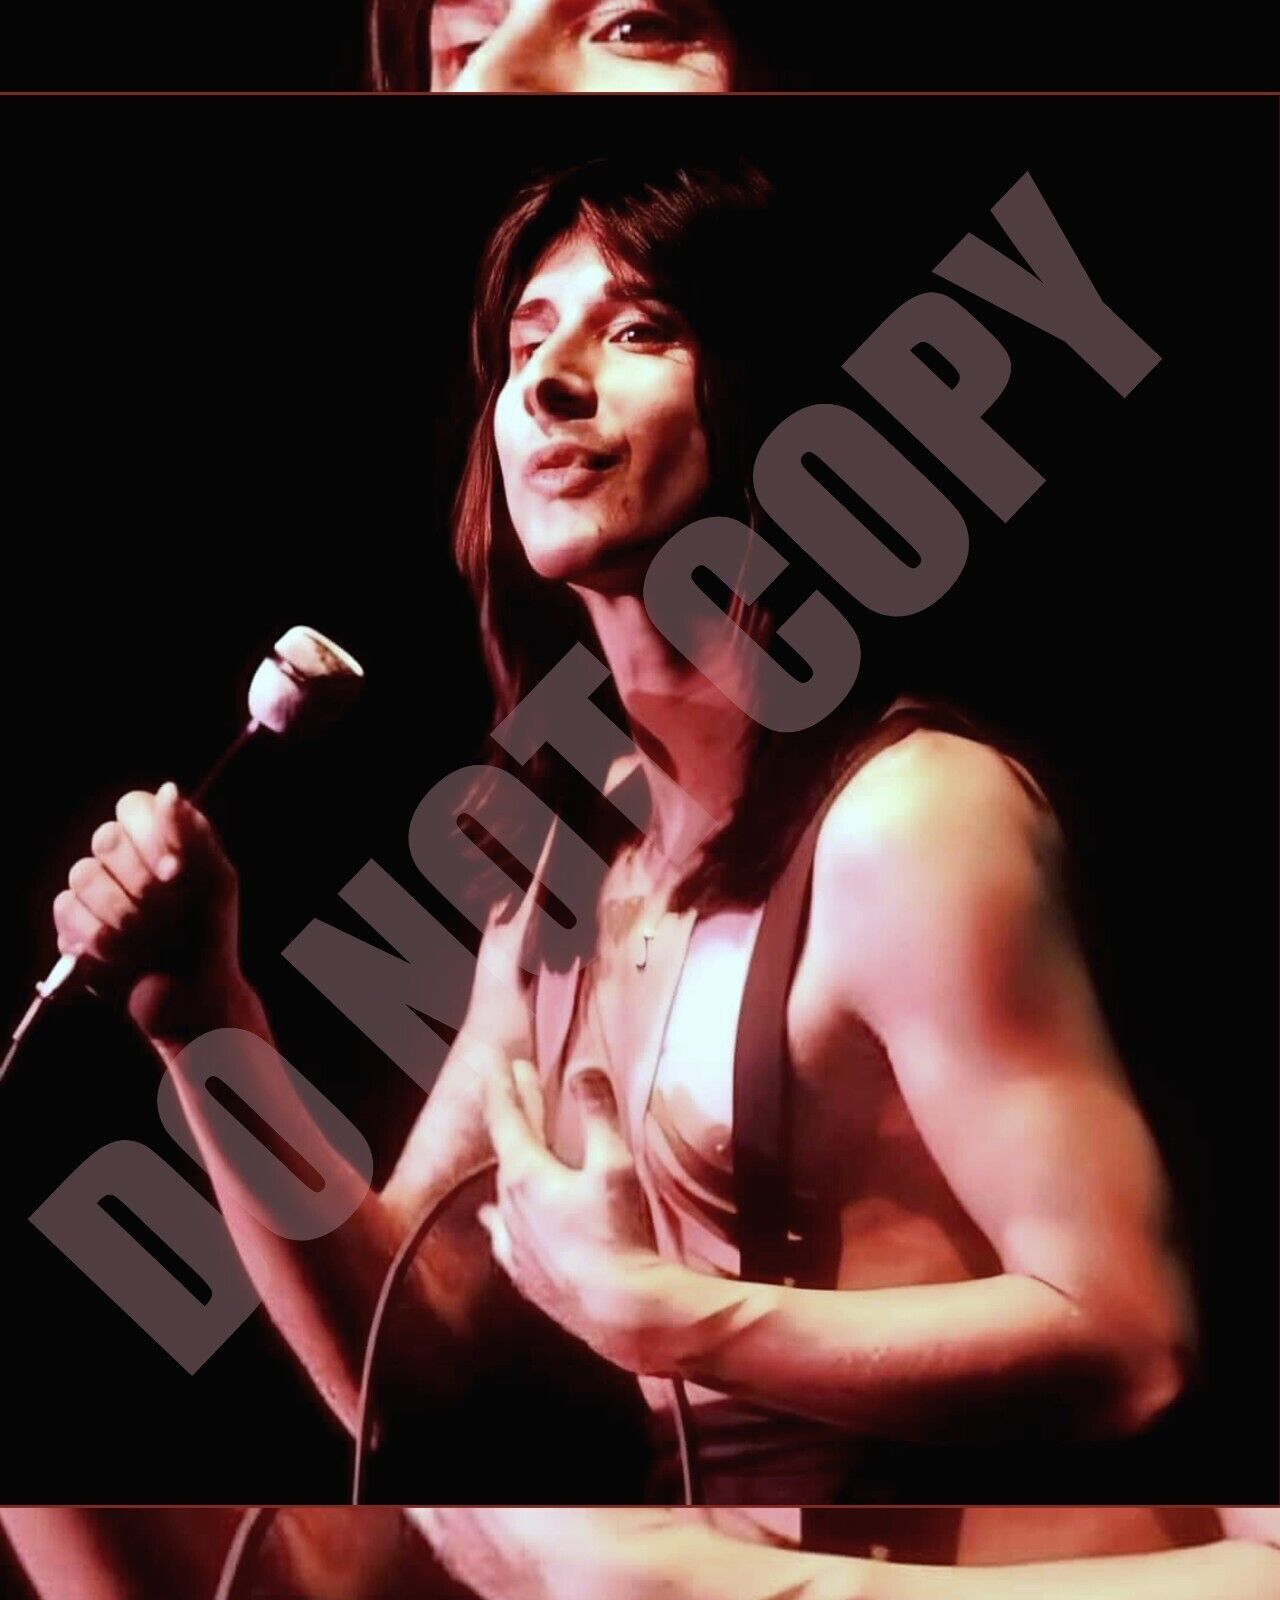 Steve Perry From Journey In Concert With No Shirt On 8x10 Photo